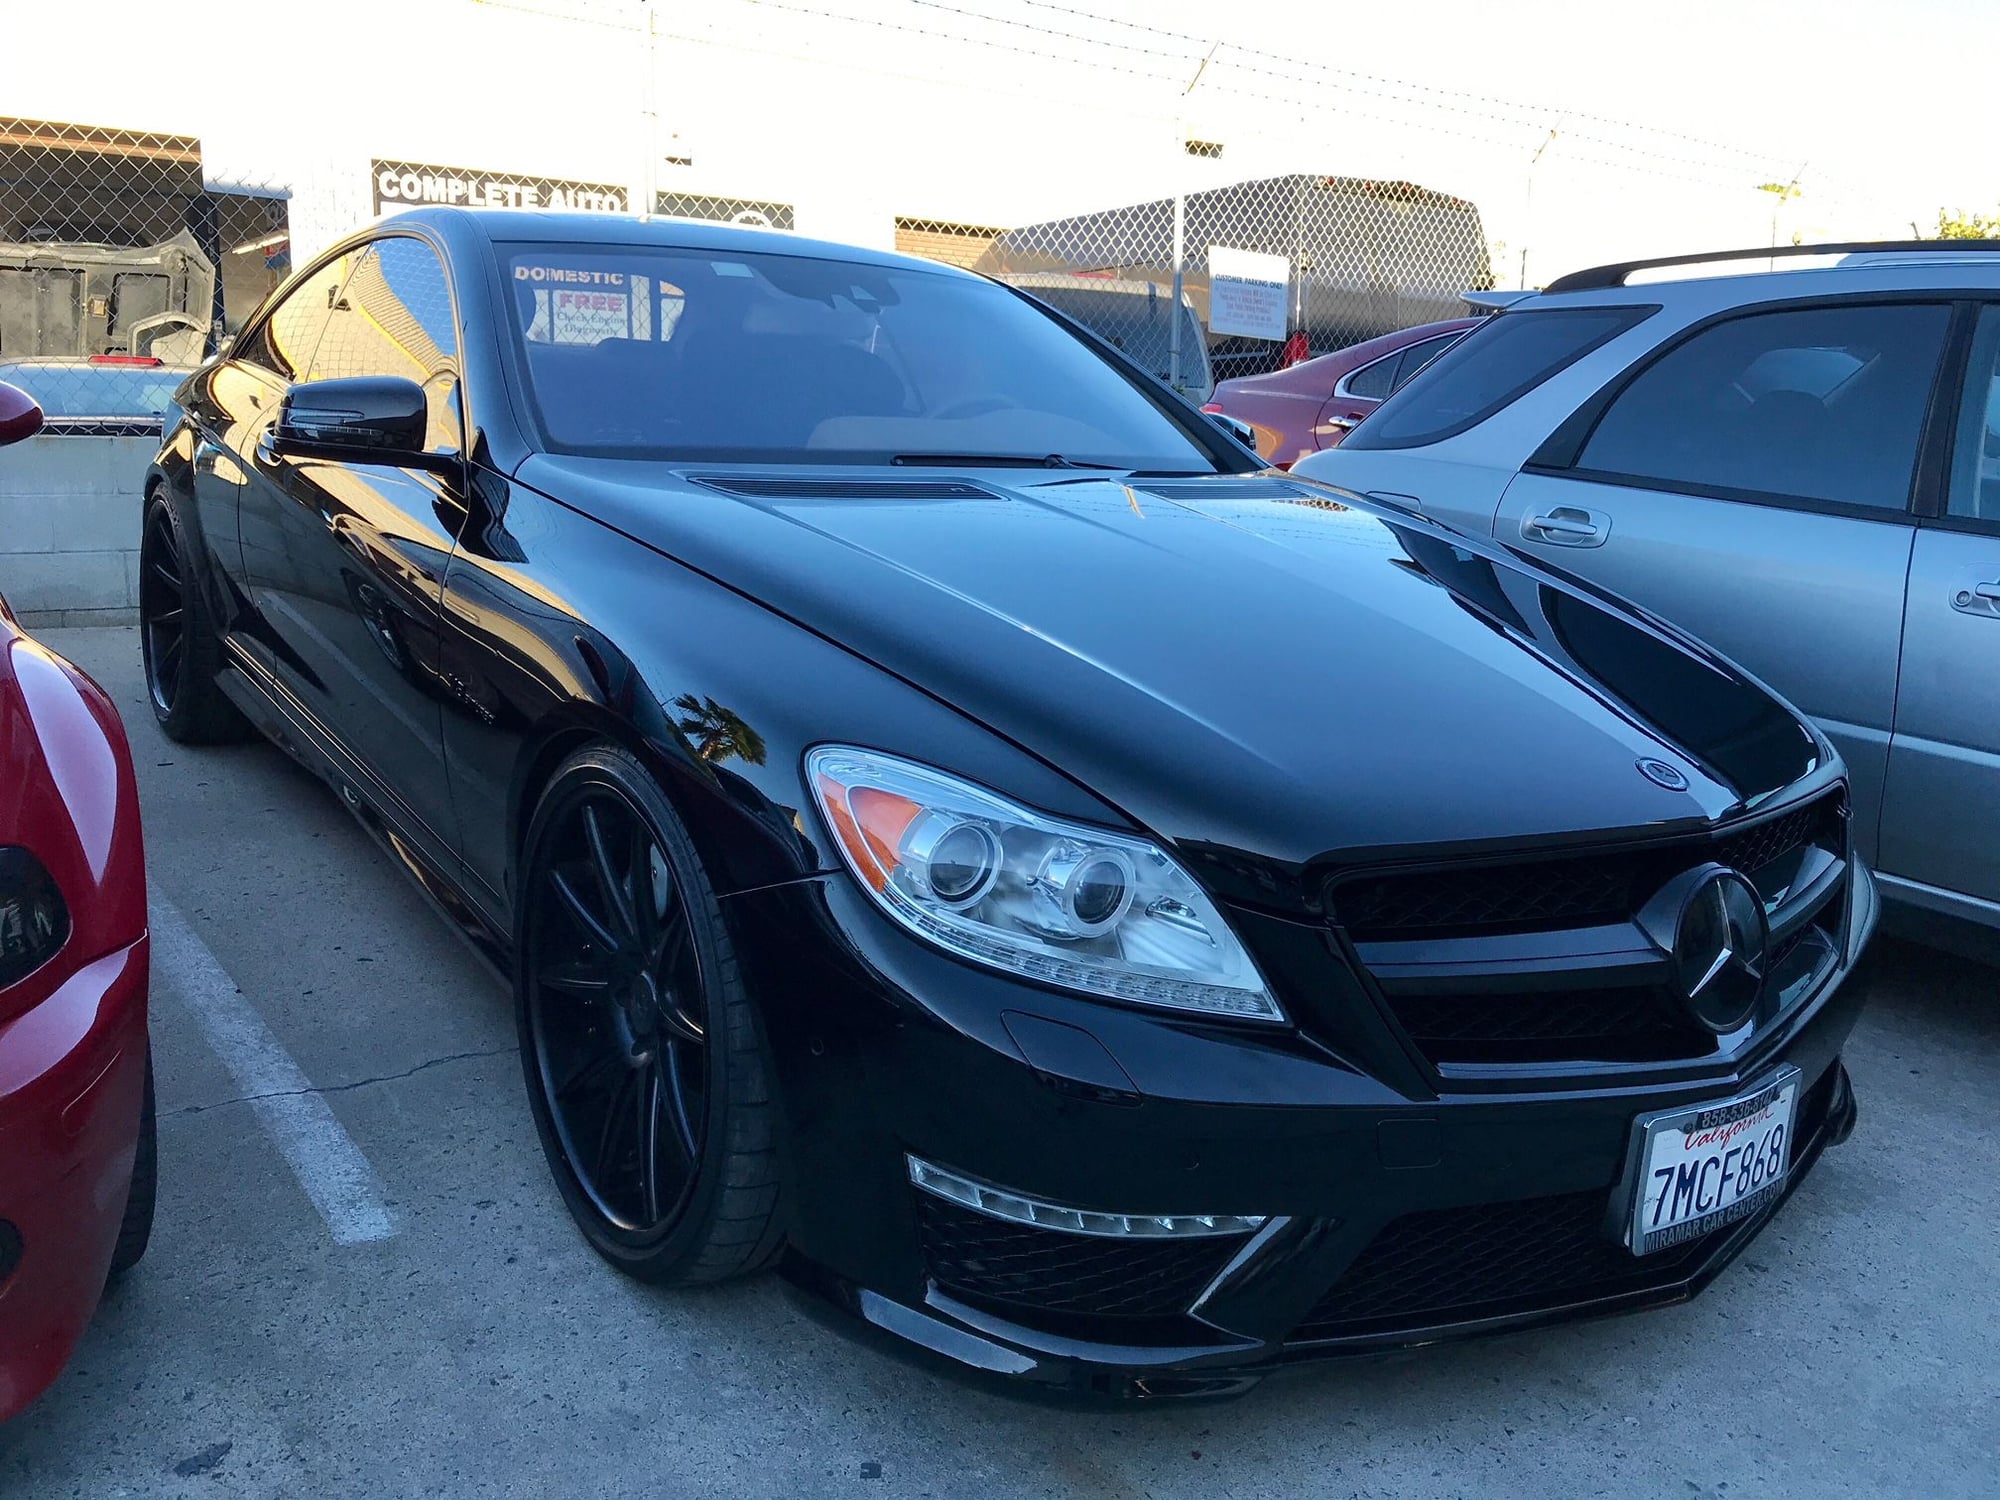 2012 Mercedes-Benz CL63 AMG - 2012 MB AMG CL63 -- Beautiful Condition - Used - VIN wddej7eb3ca028692 - 75,000 Miles - 8 cyl - 2WD - Automatic - Coupe - Black - Trappe, MD 21673, United States